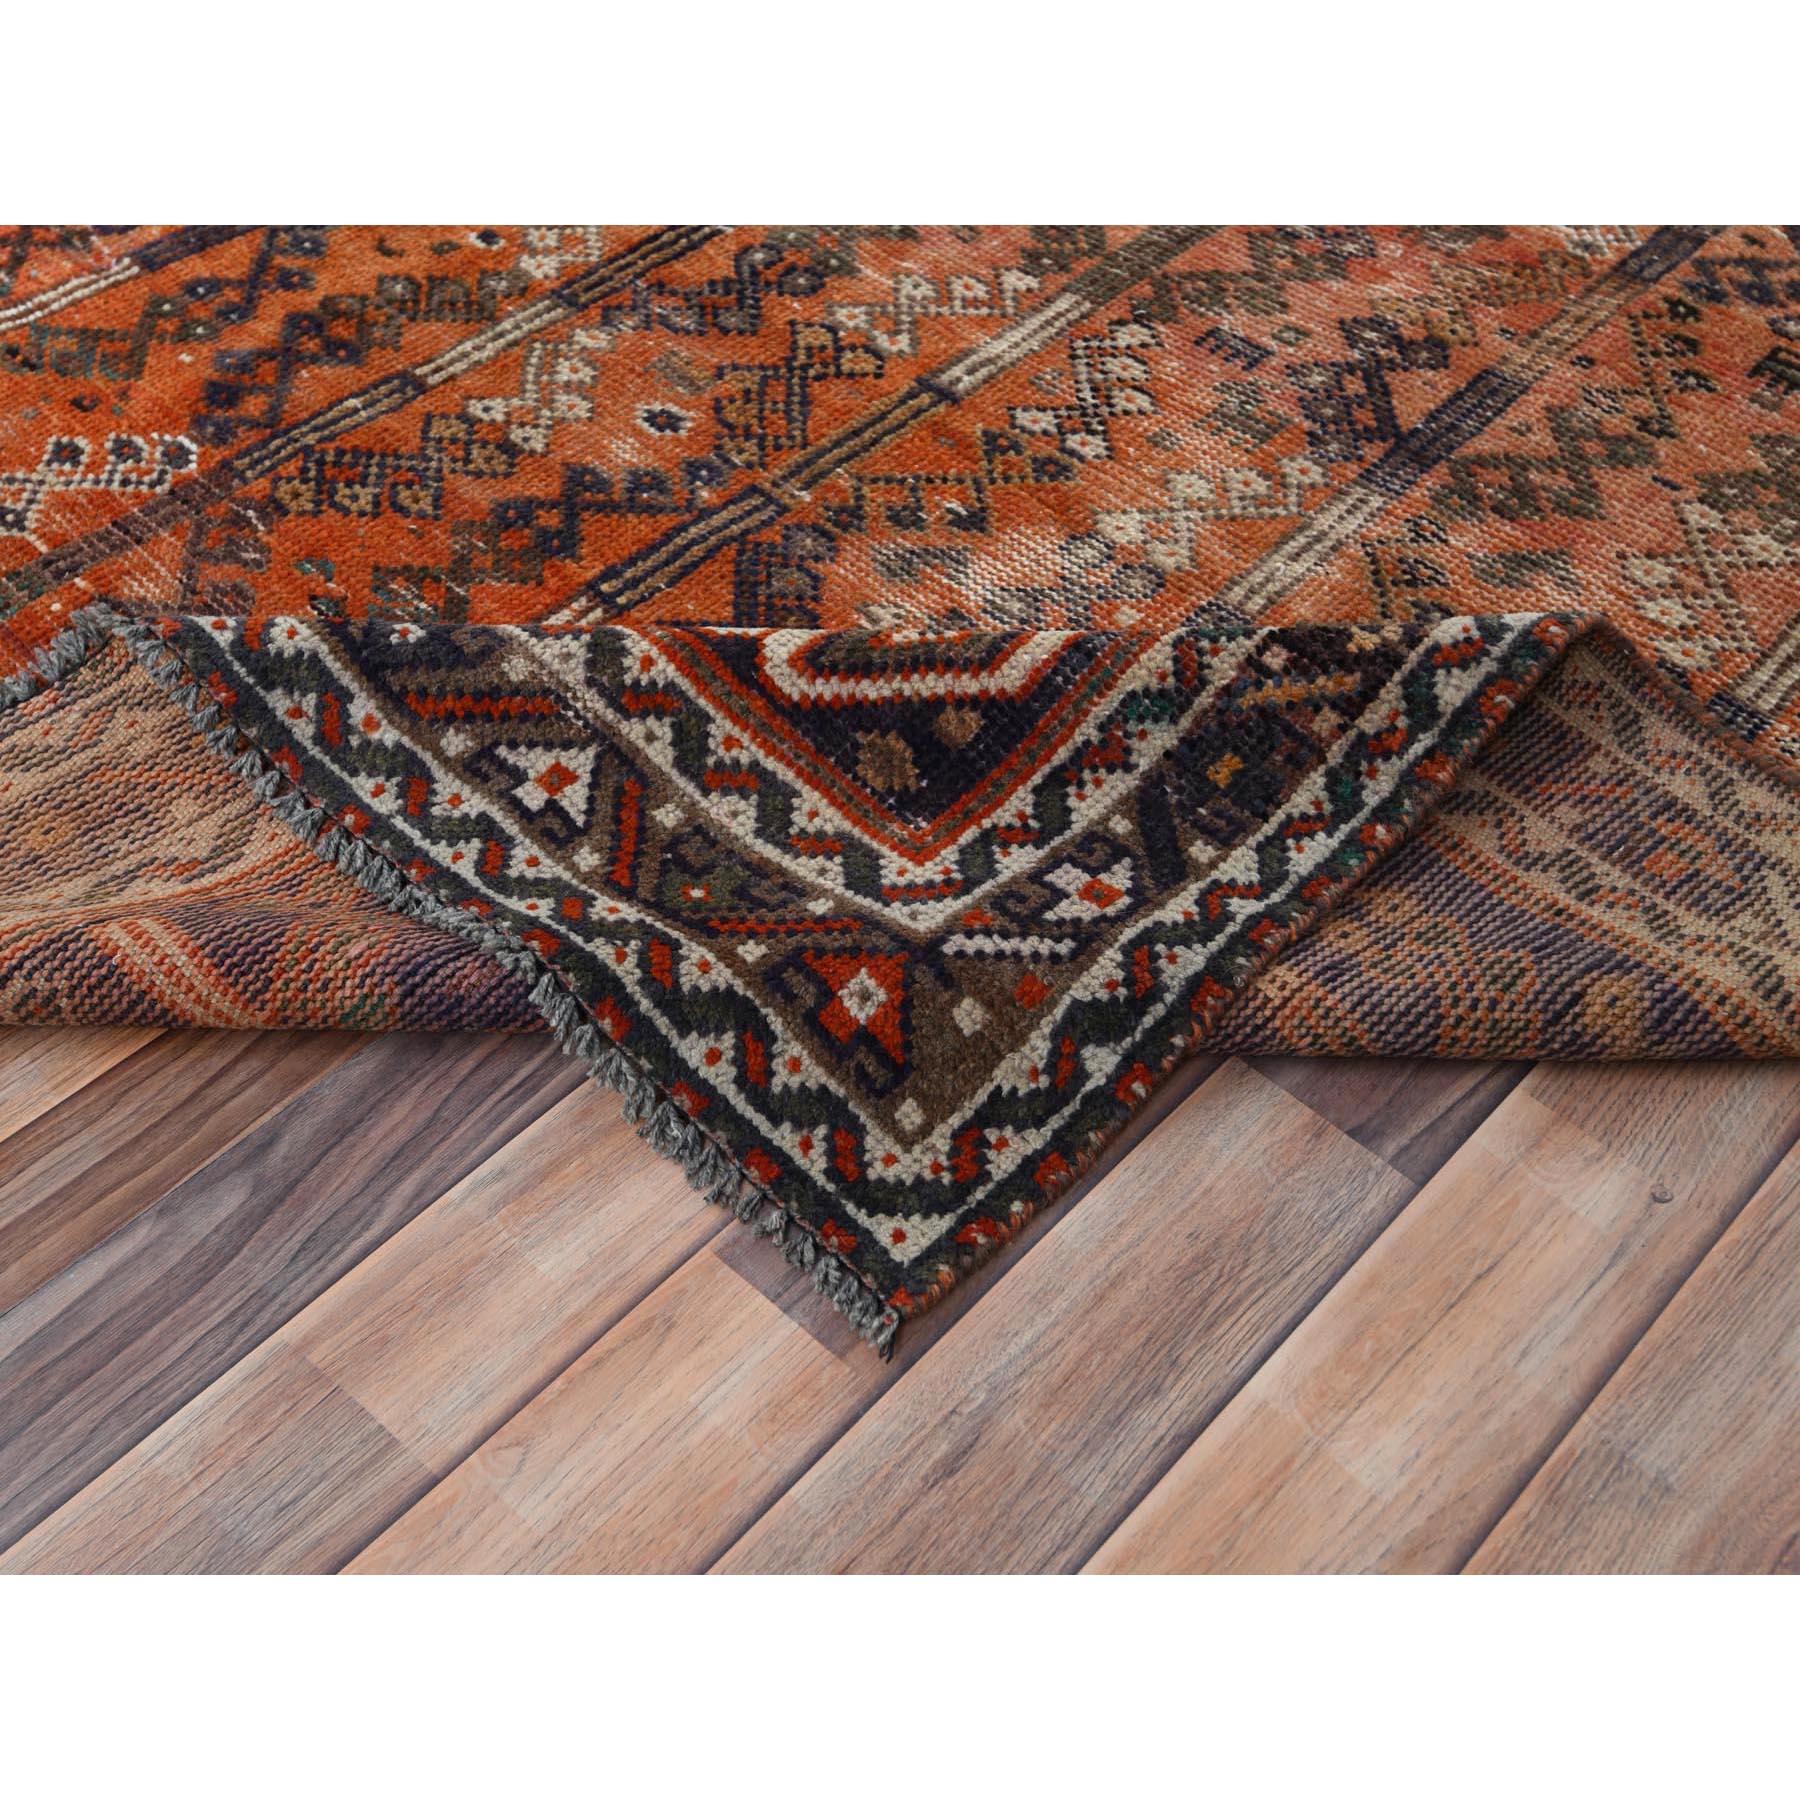 Sunset Colors, Worn Wool Hand Knotted Vintage Persian Shiraz, Distressed Rug 1